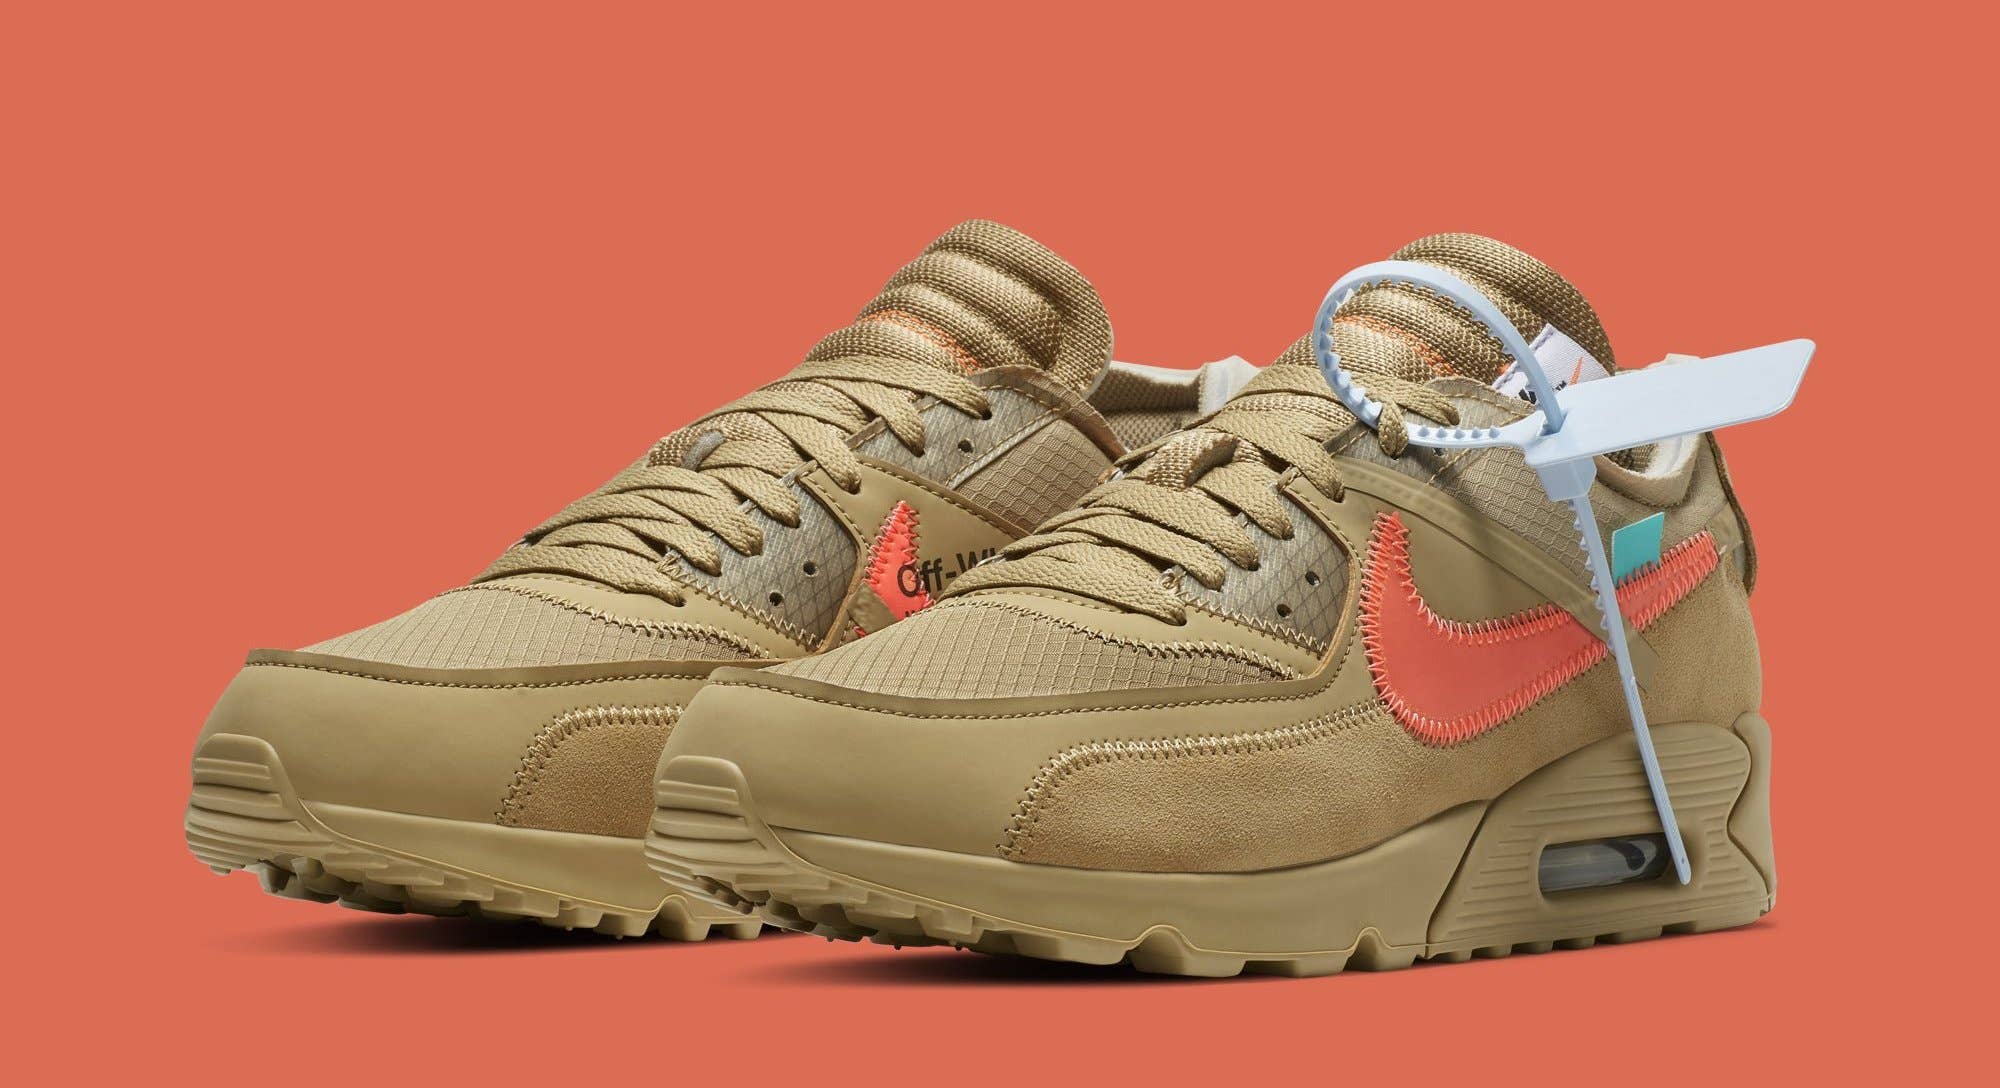 langzaam kalender struik Desert Ore' Off-White x Air Max 90s Releasing Later Than Expected | Complex